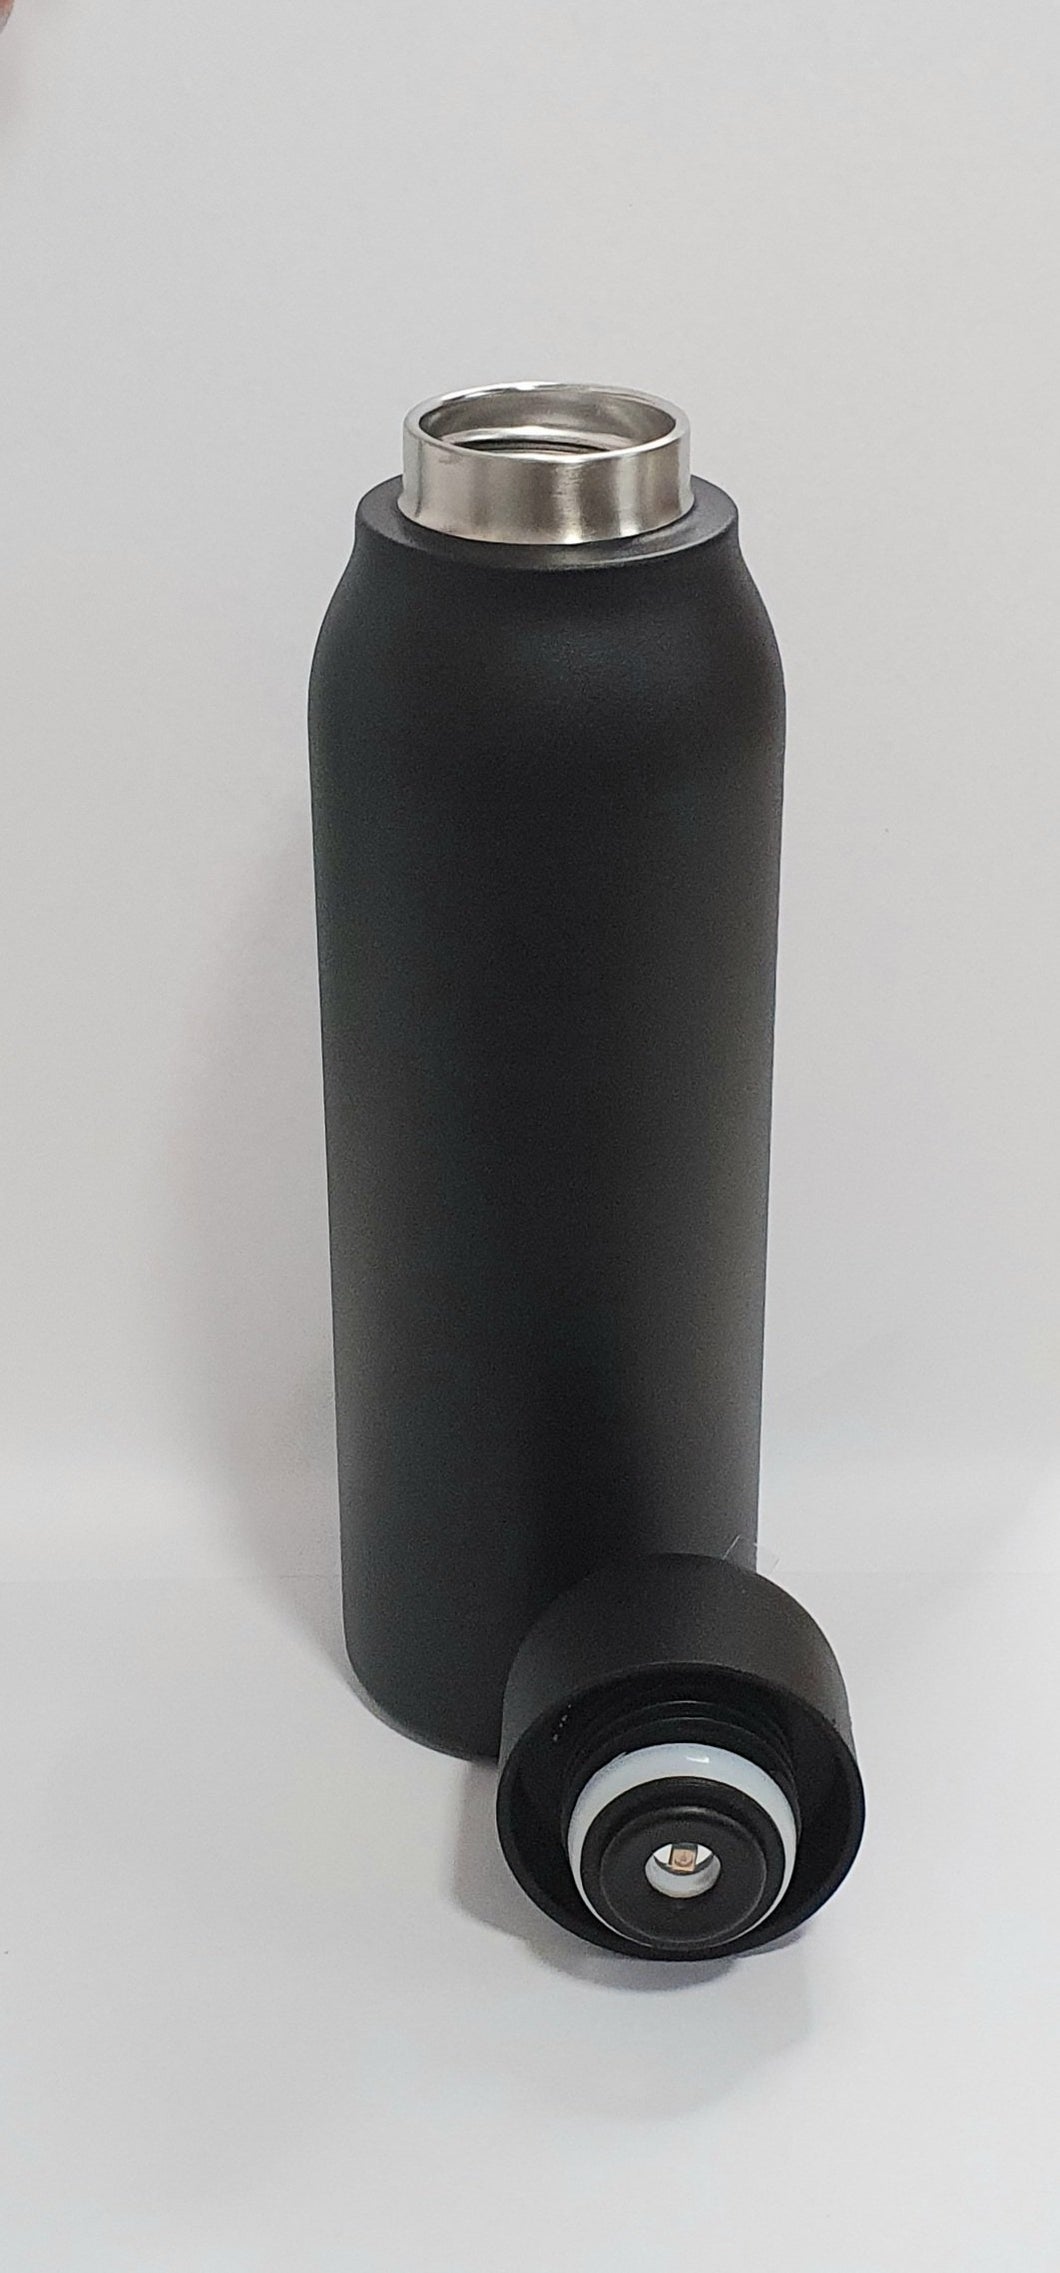 Insulated Self-Cleaning UV Water Bottle - 600ml